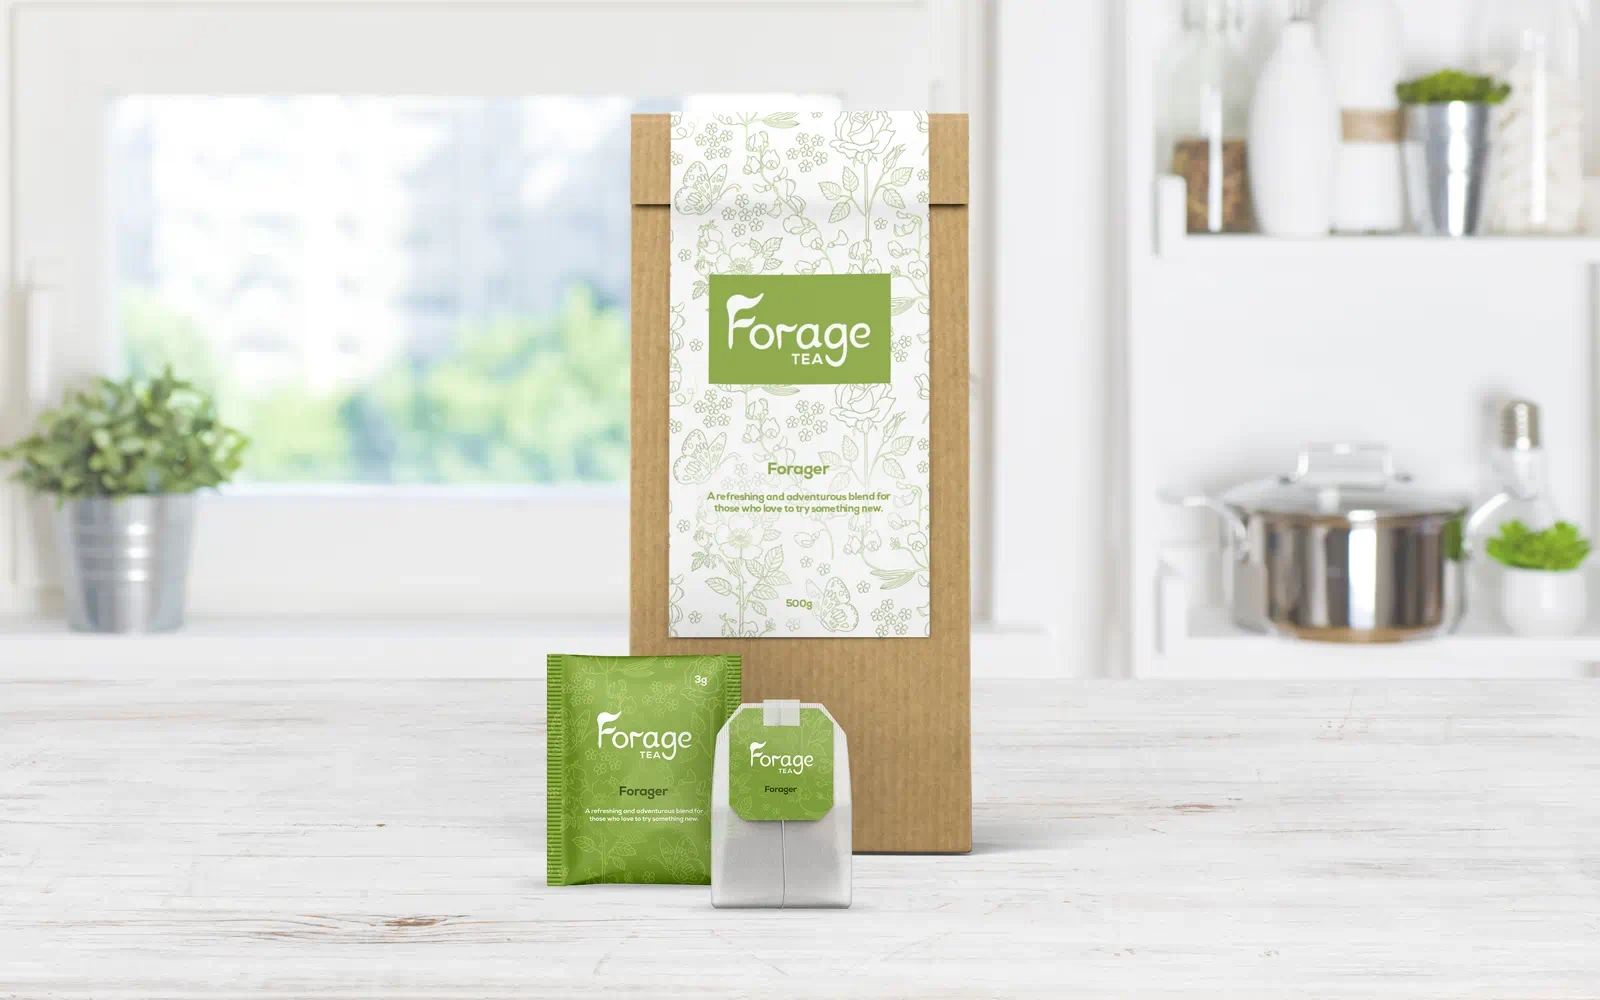 Packaging mockups with the Forage Tea branding, including the inner packet, tea bag sachet and tea bag displayed in a well lit, white, modern kitchen